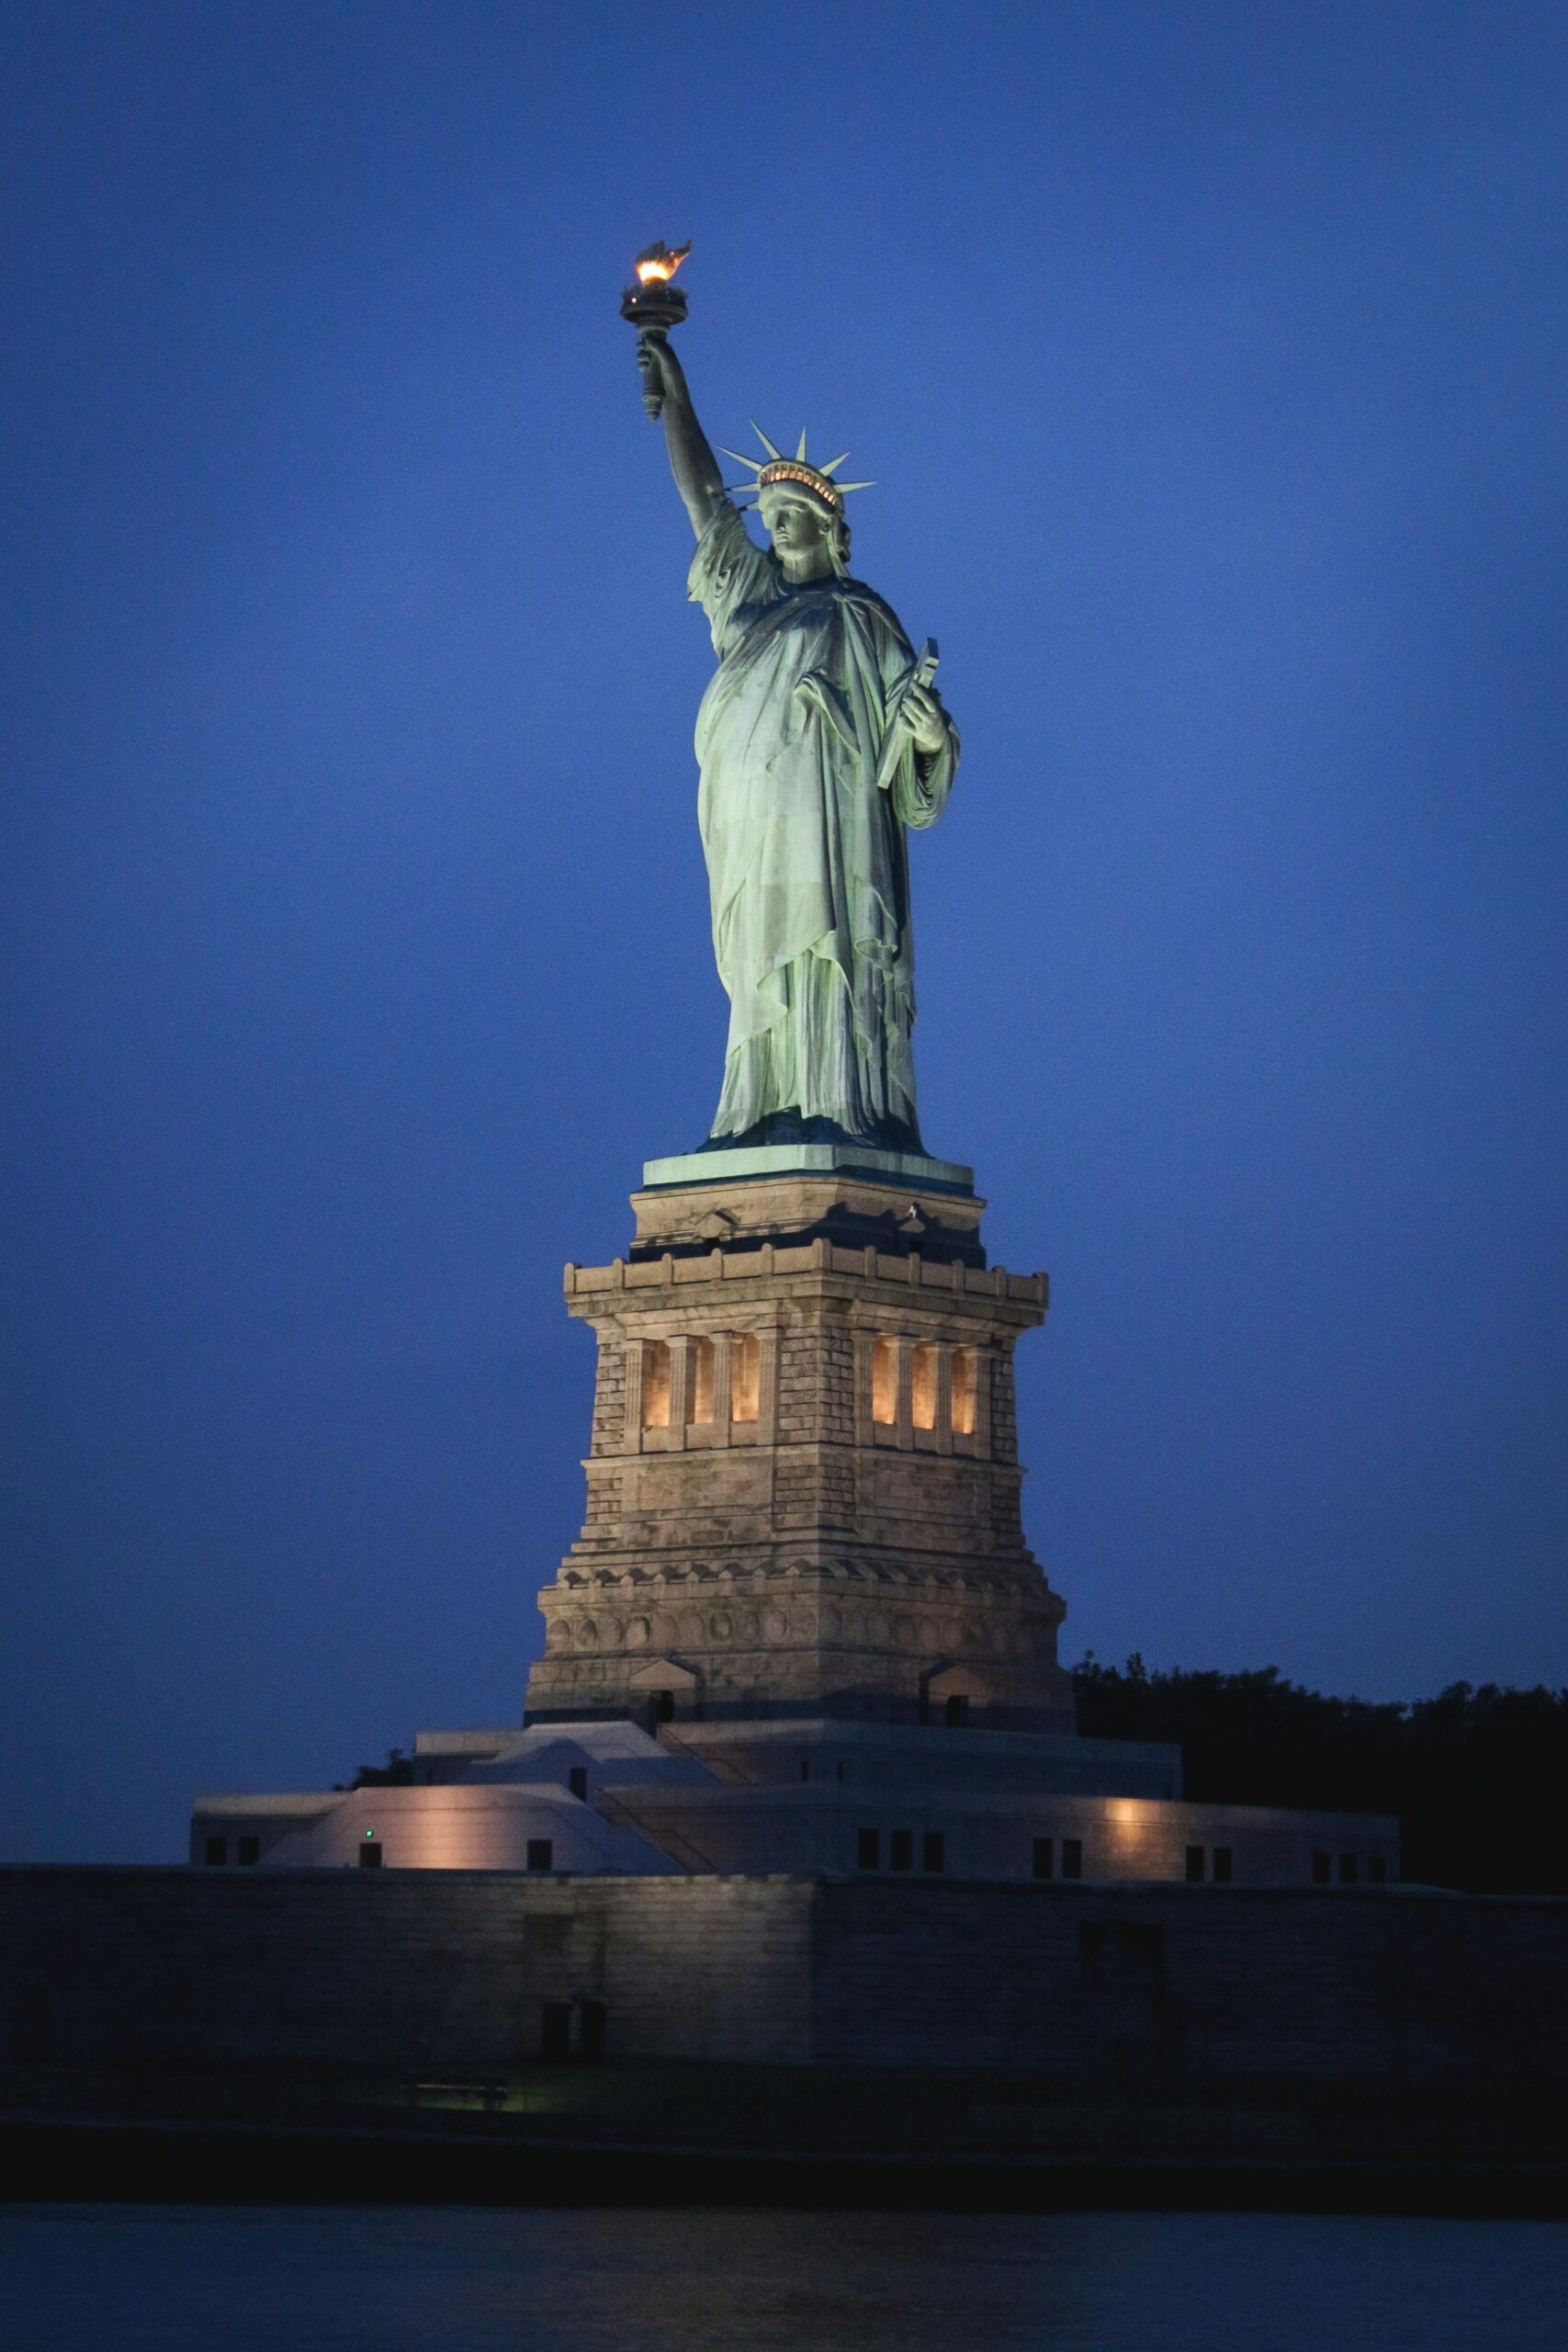 Image of Statue of Liberty